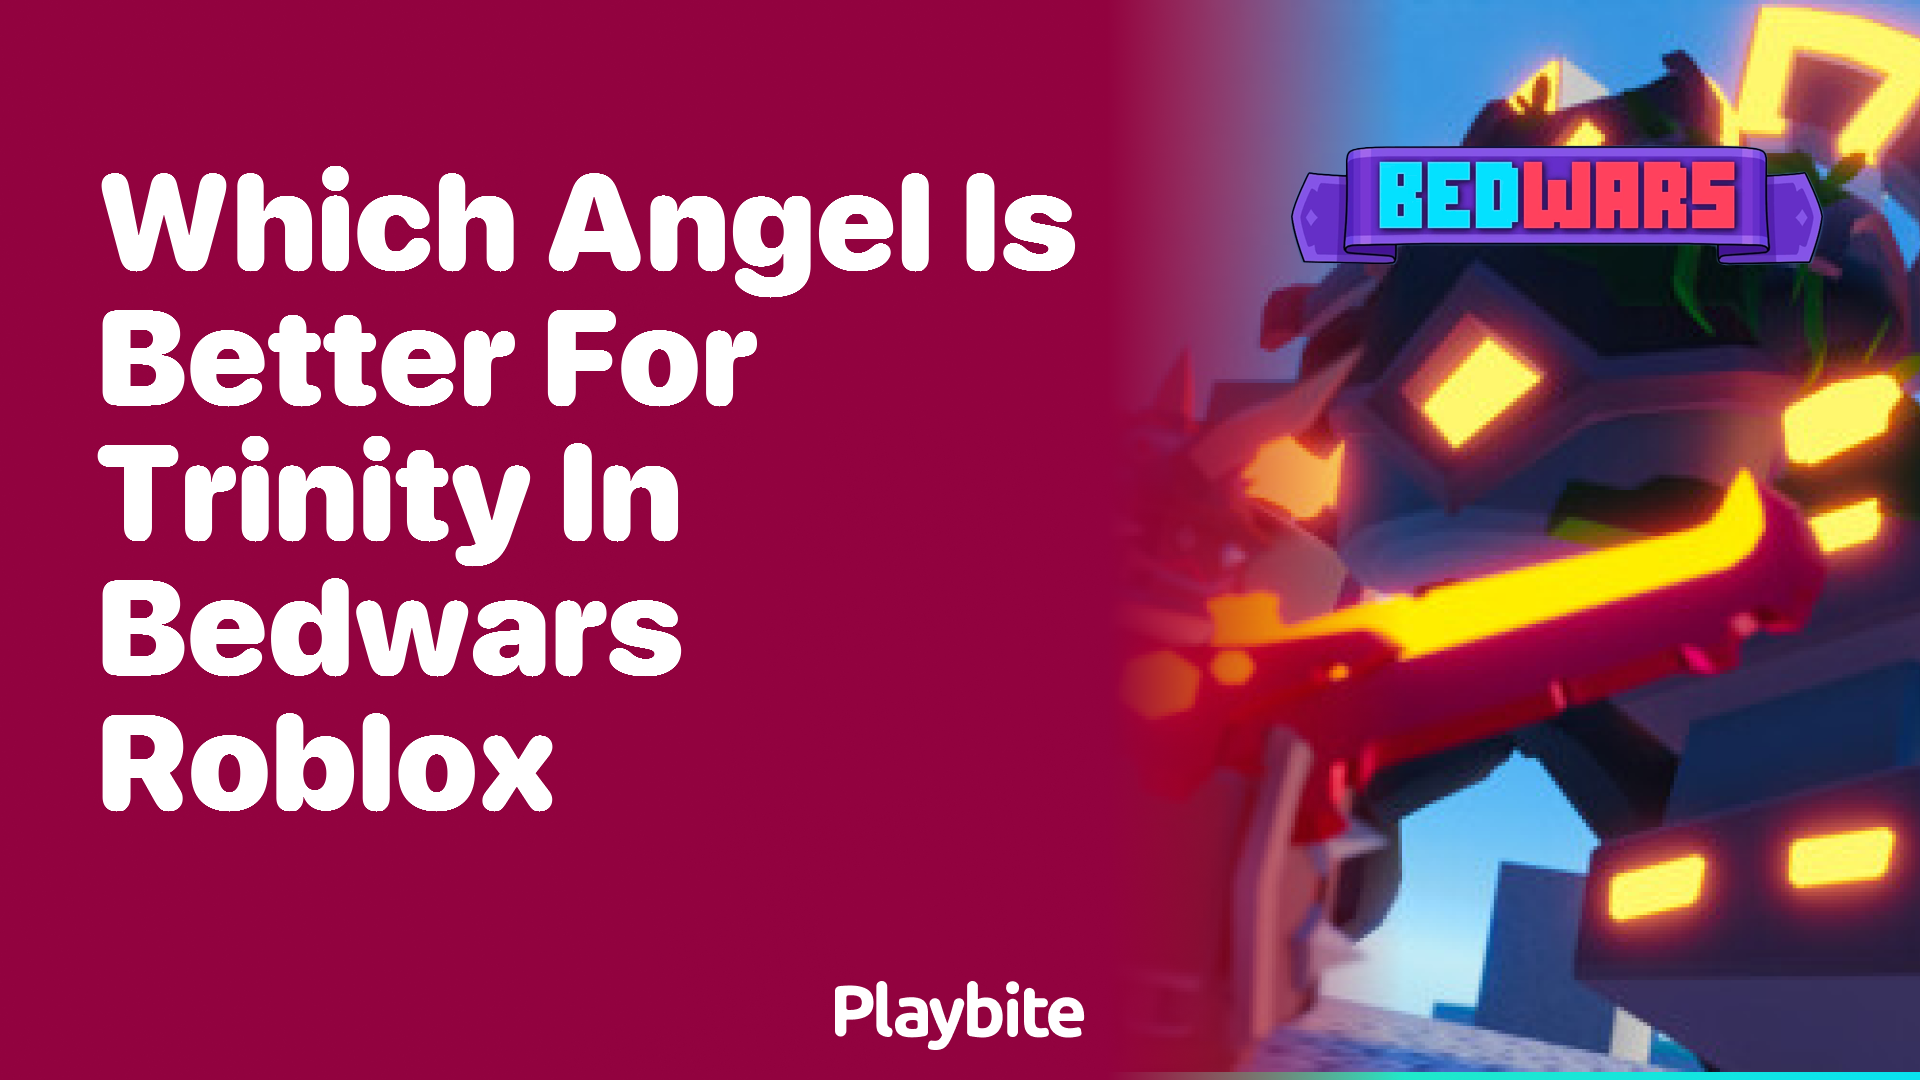 Which Angel is the Top Pick for Trinity in Bedwars Roblox?